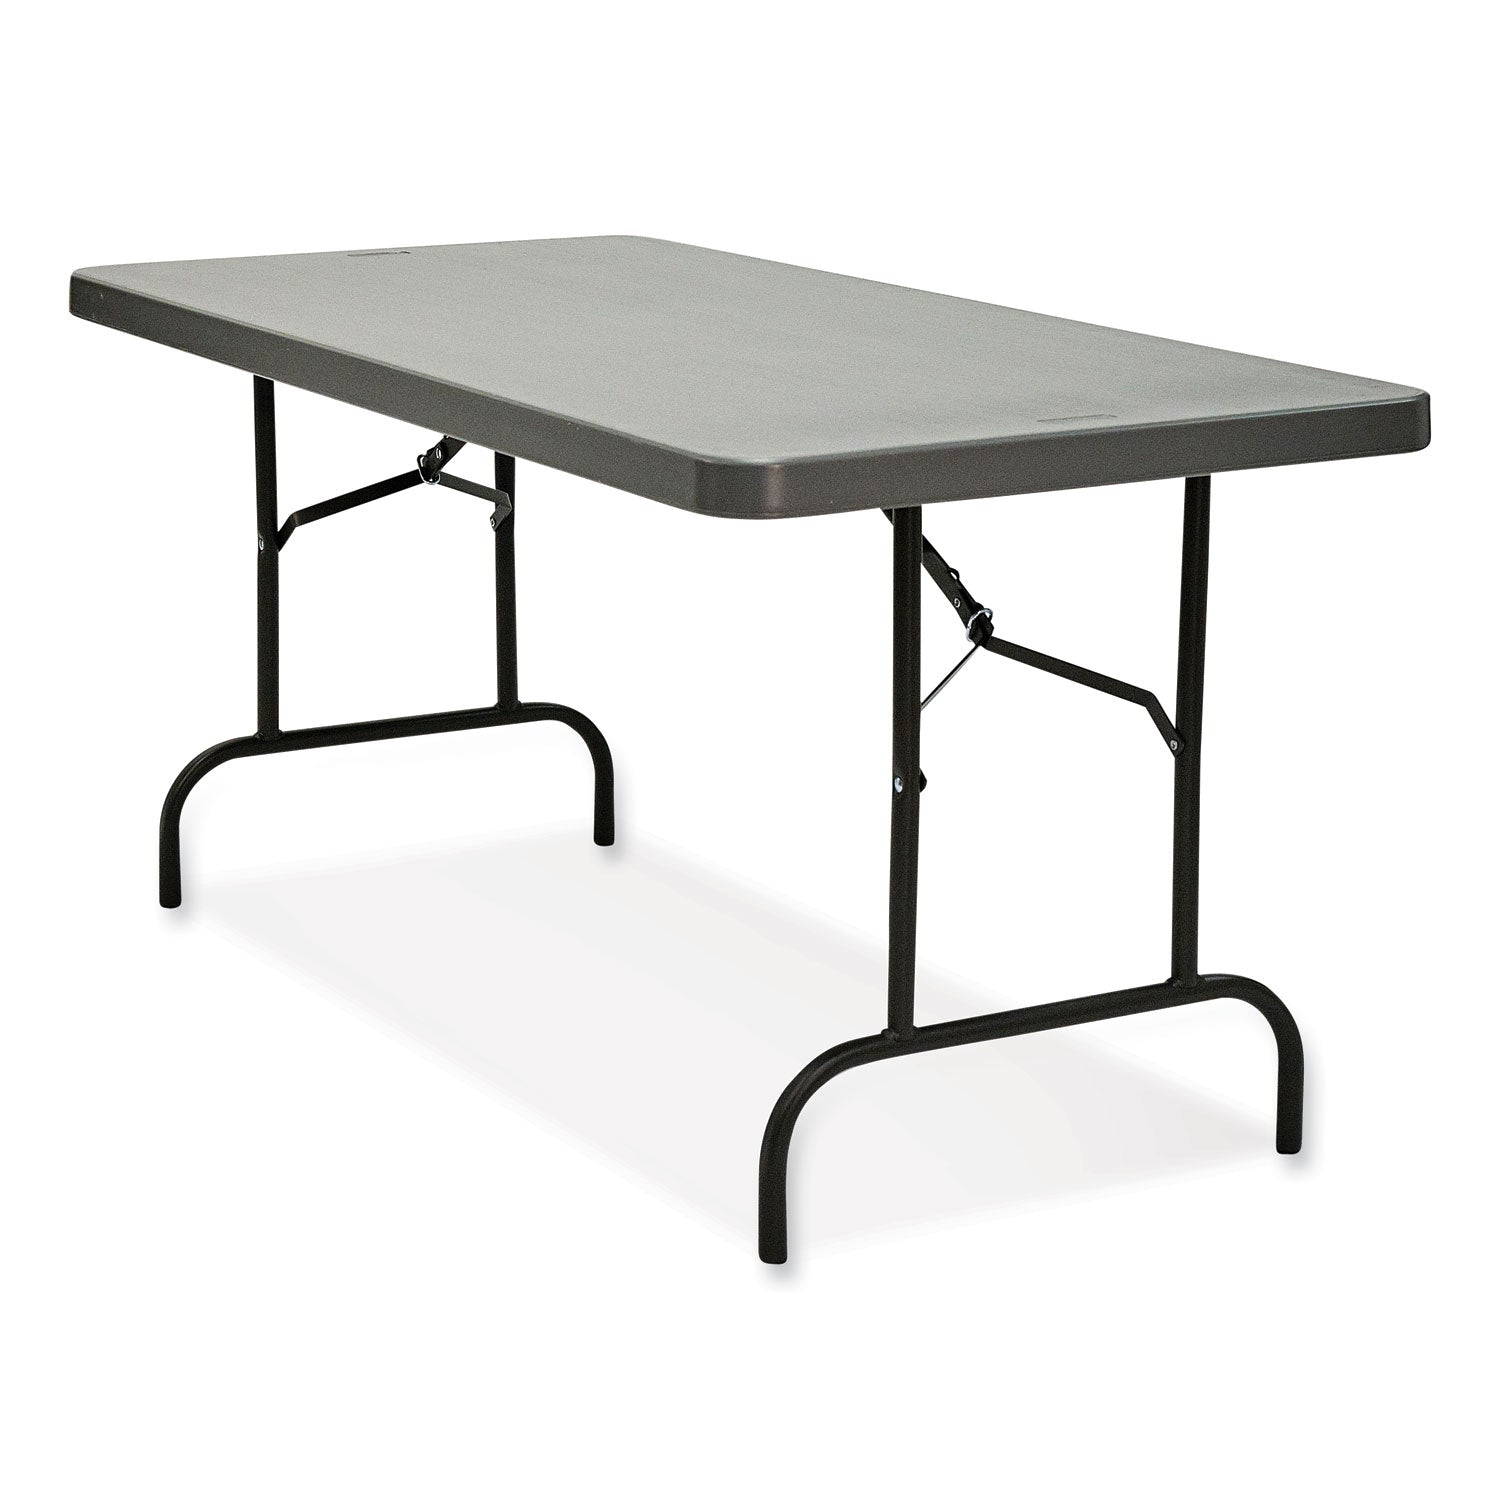 indestructable-commercial-folding-table-rectangular-60-x-30-x-29-charcoal-top-charcoal-base-legs_ice65517 - 1